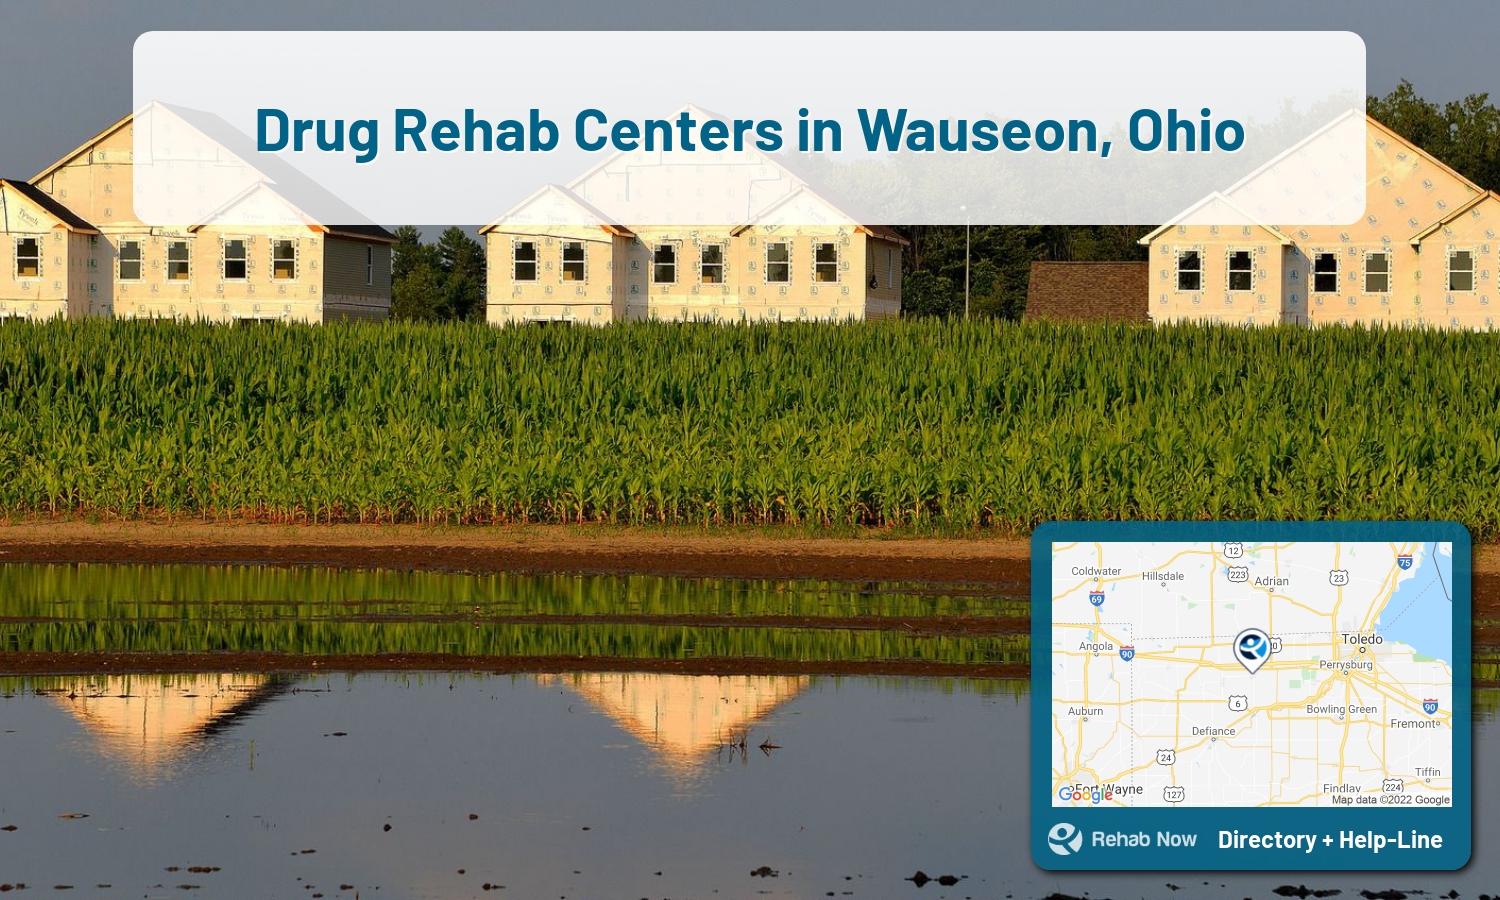 Find drug rehab and alcohol treatment services in Wauseon. Our experts help you find a center in Wauseon, Ohio